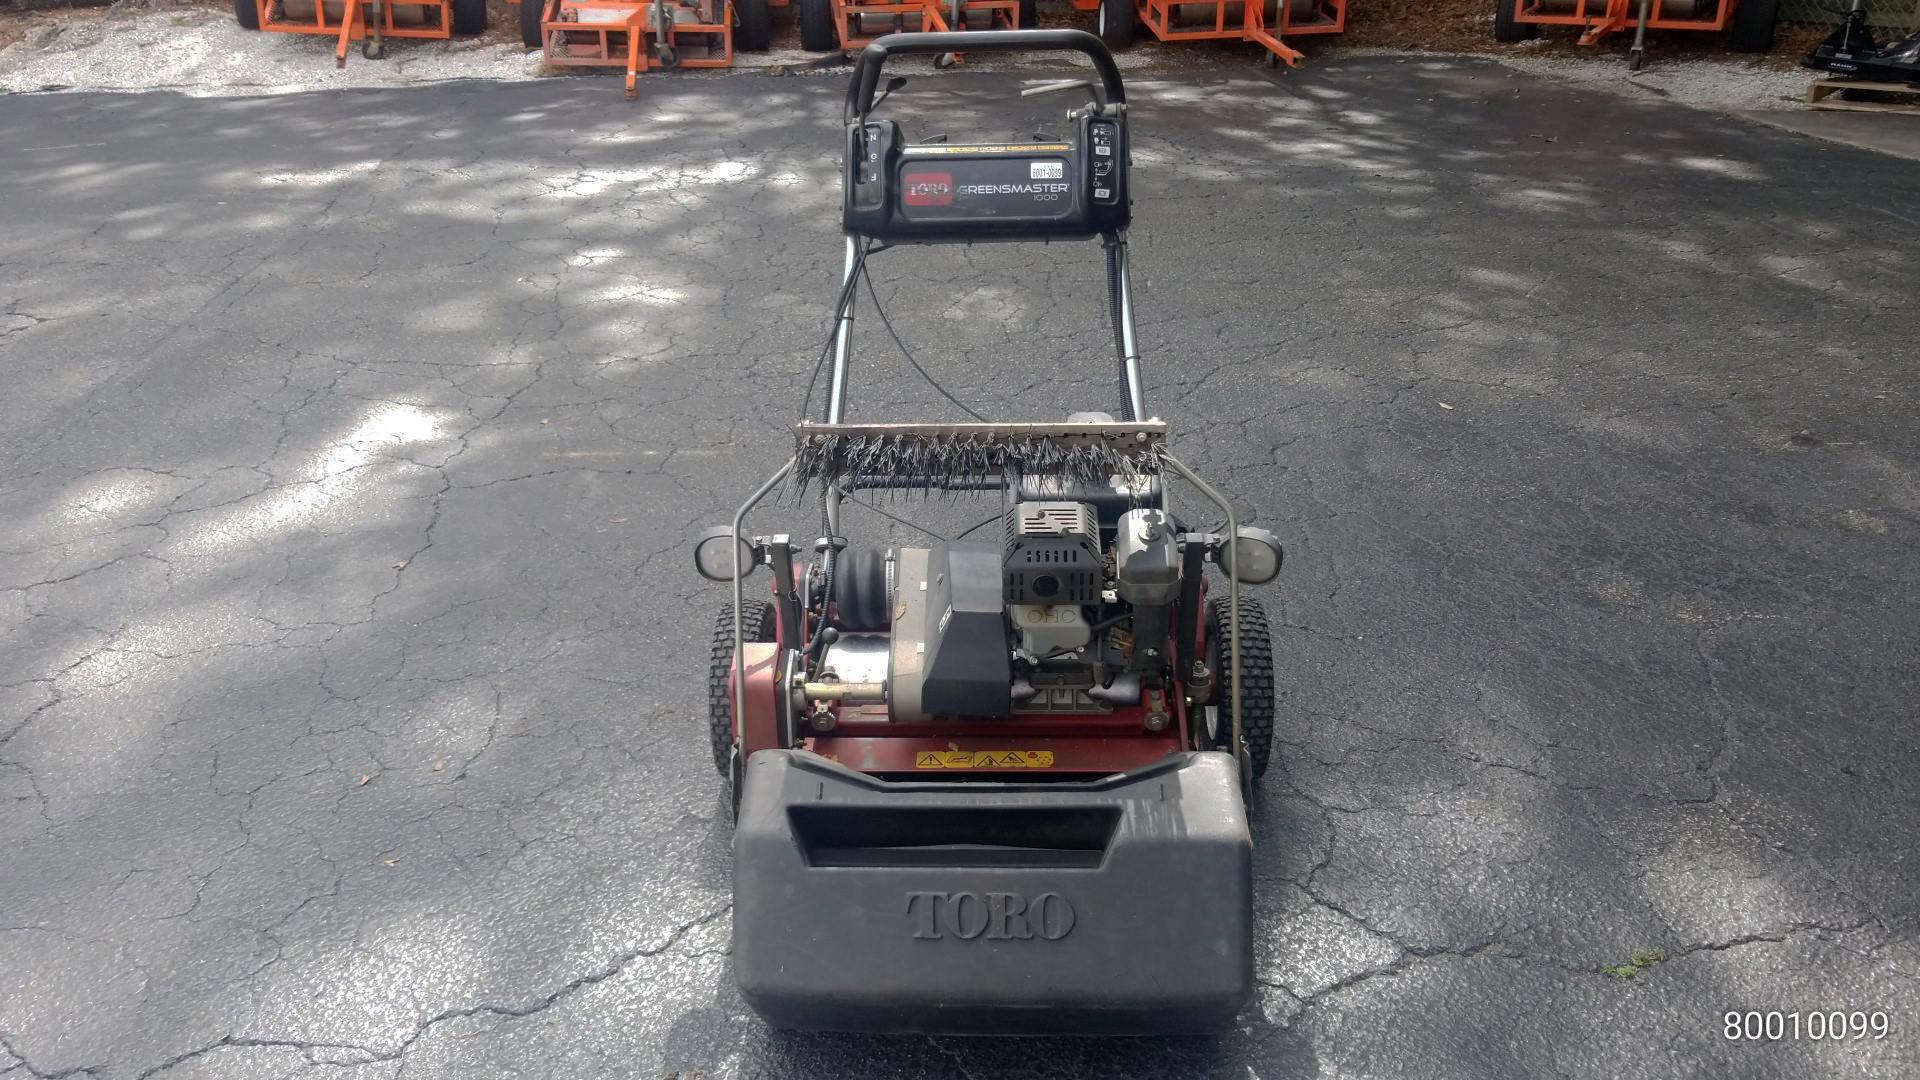 Wesco Turf Used Turf Equipment And Golf Course Equipment